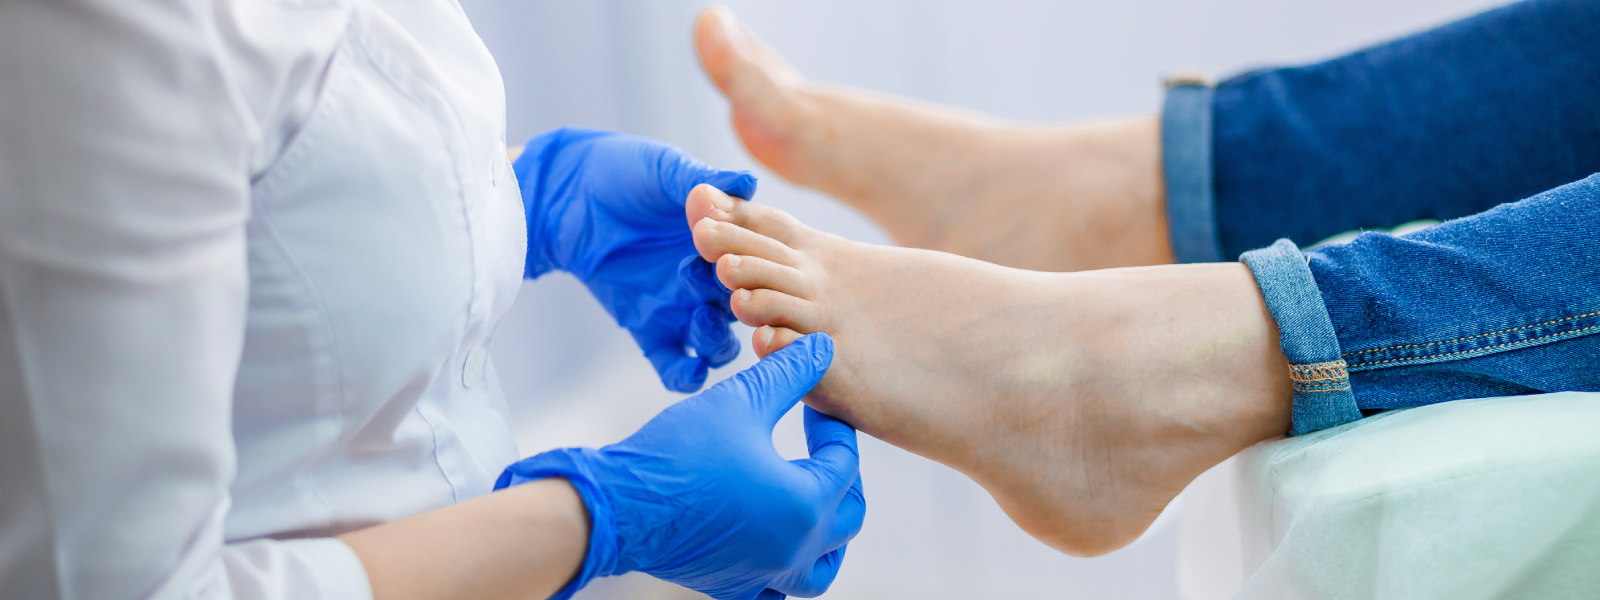 Give Your Feet the Care They Deserve in 2022